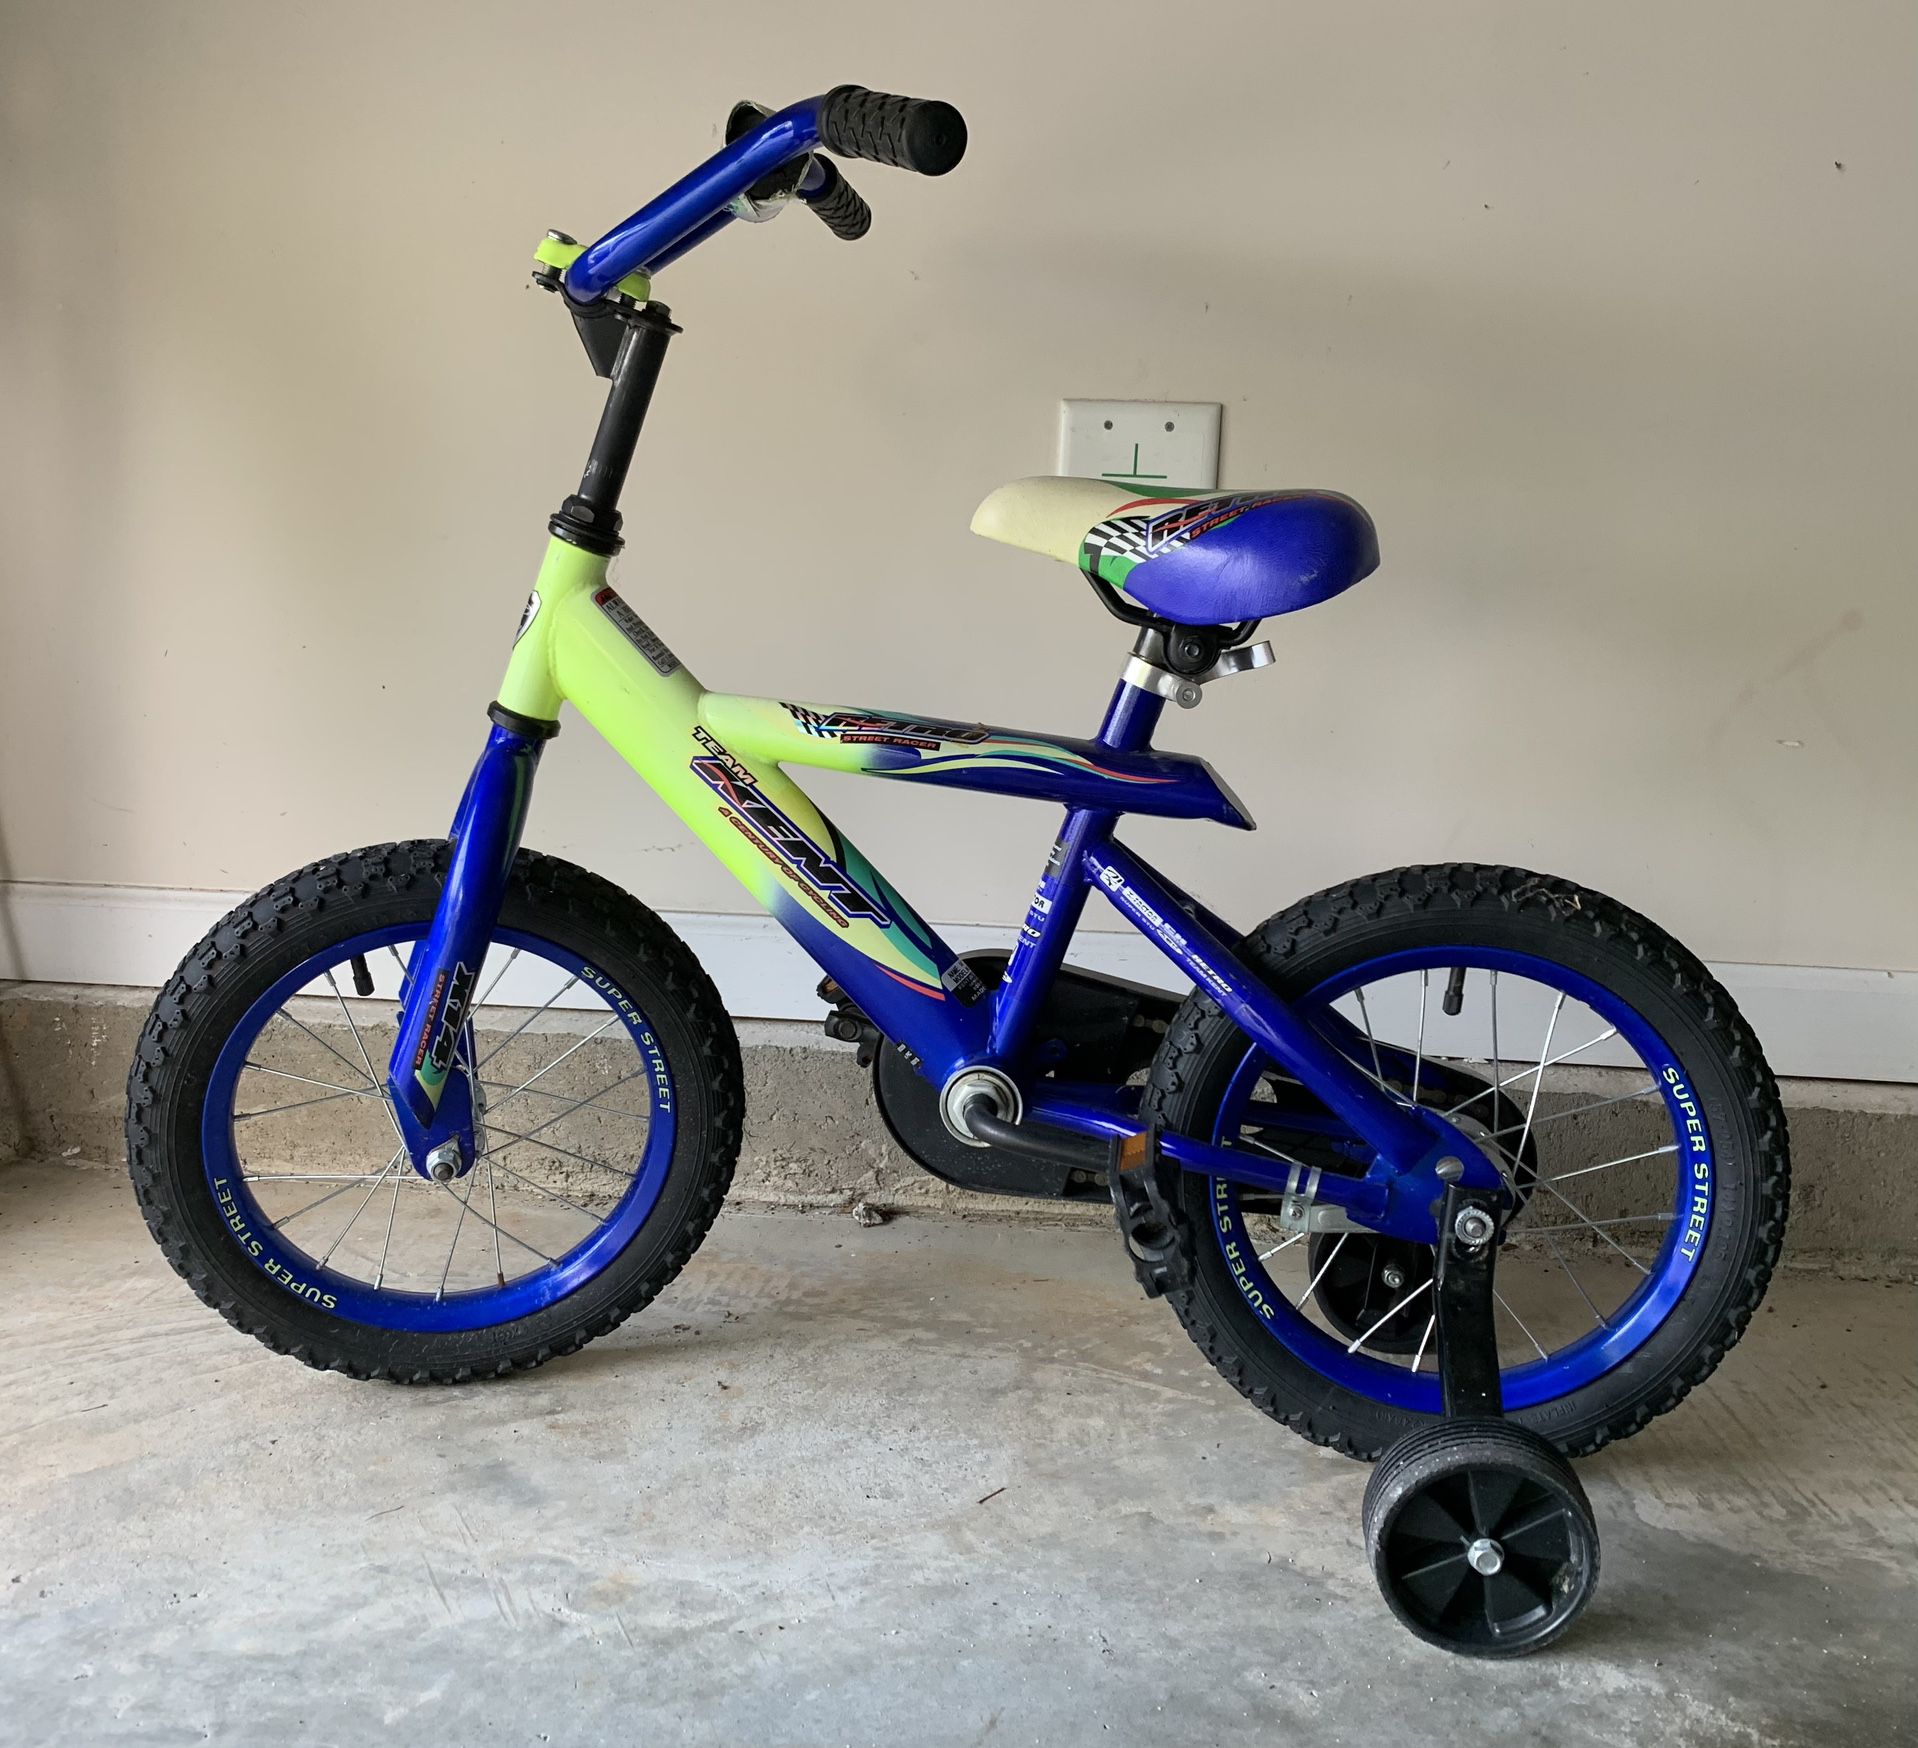 Kids Bicycle with Training Wheels